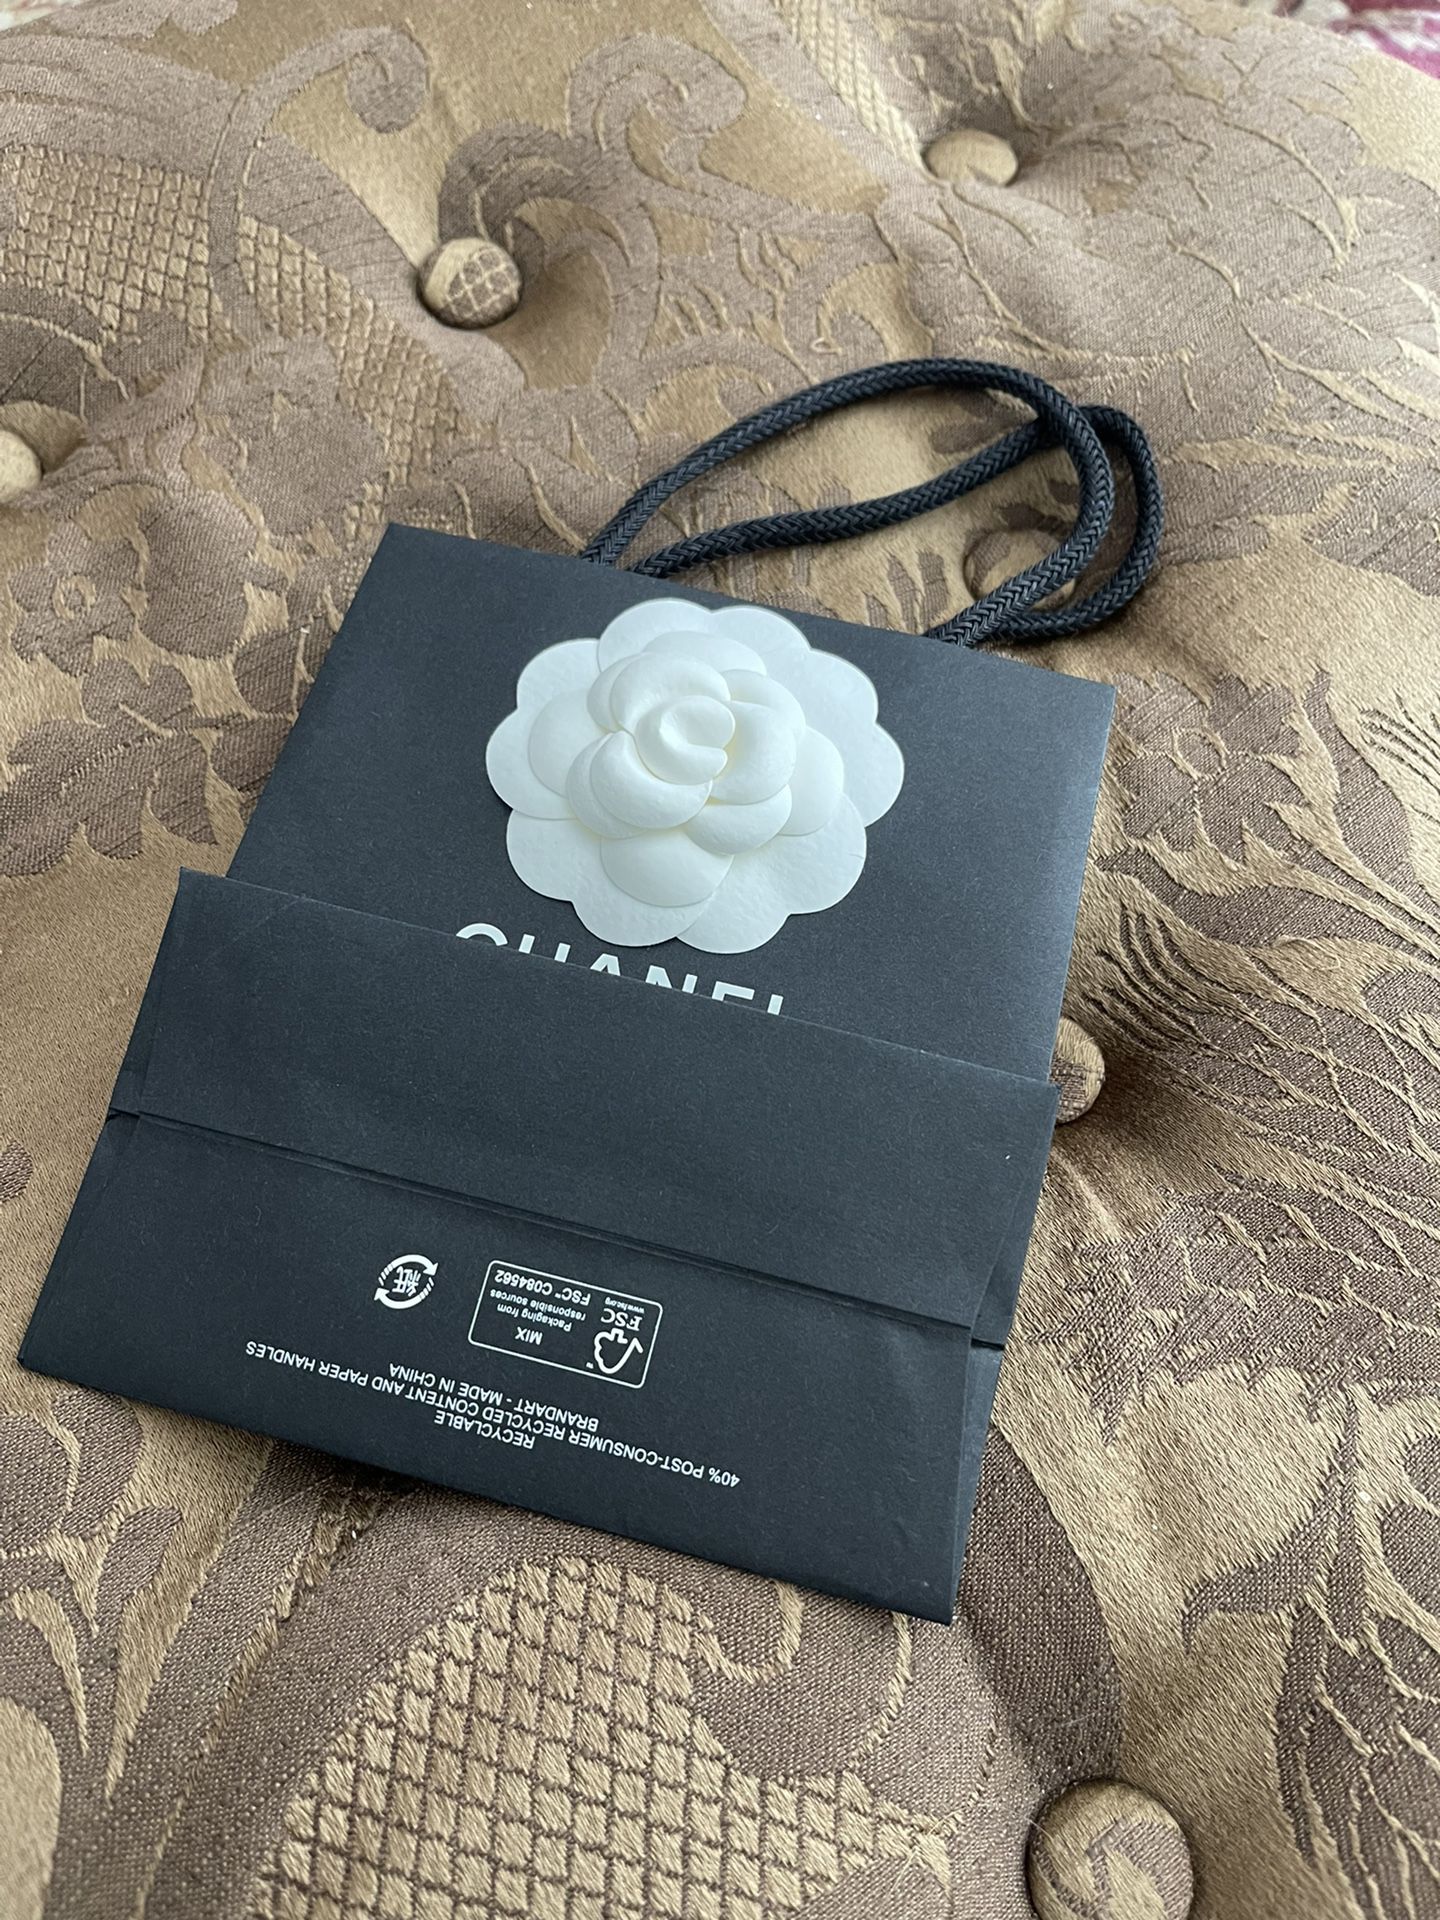 Chanel Shopping Bags - Wholesales High Quality Handbags Store